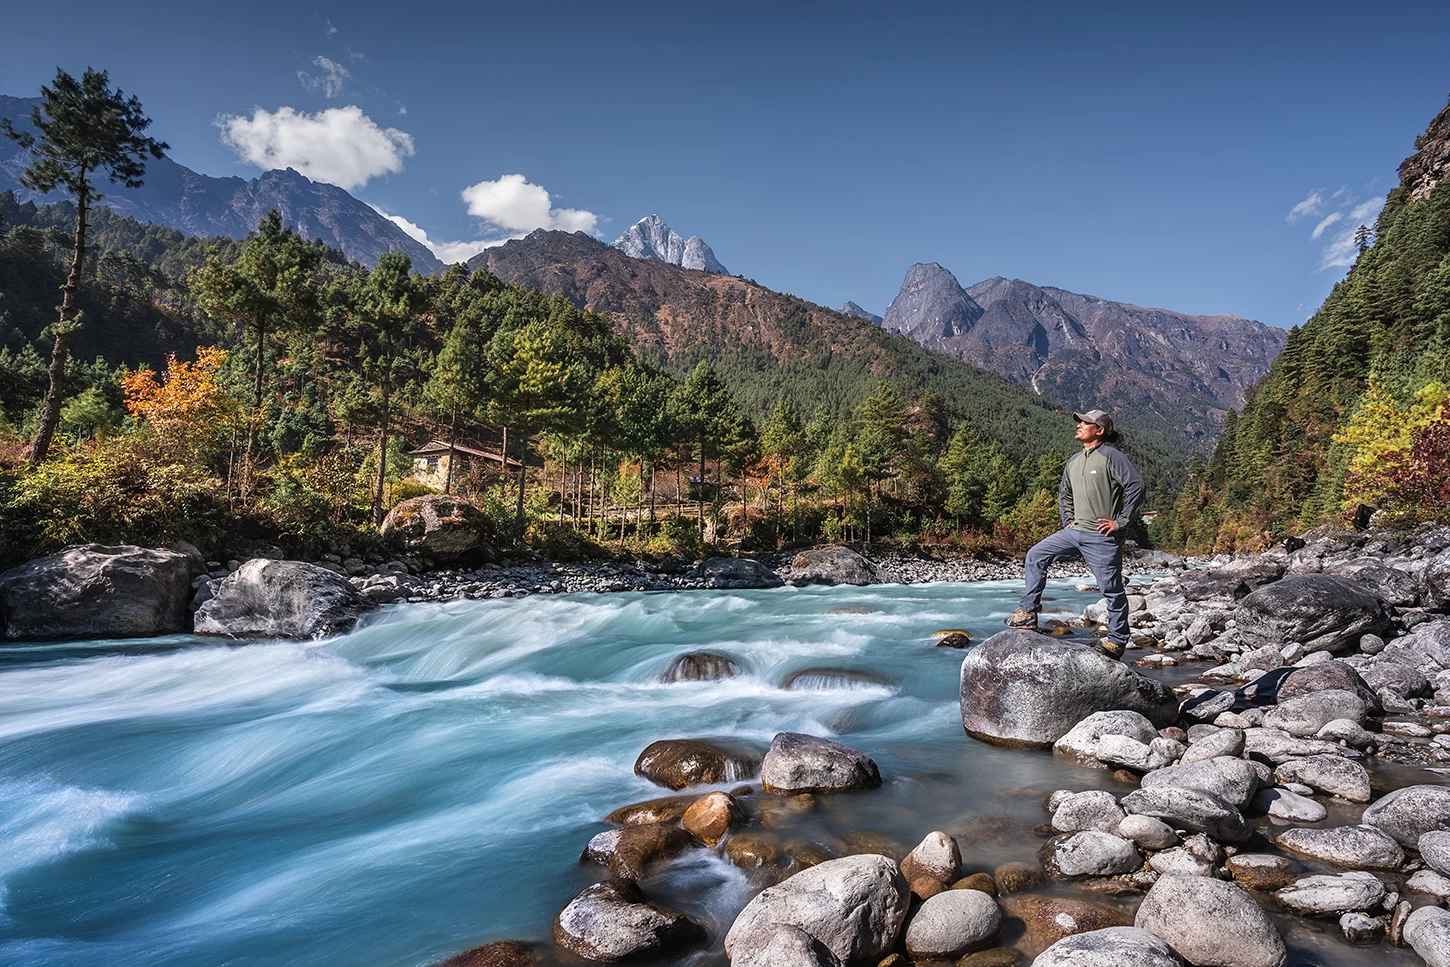  Dudkosi River, Everest. 